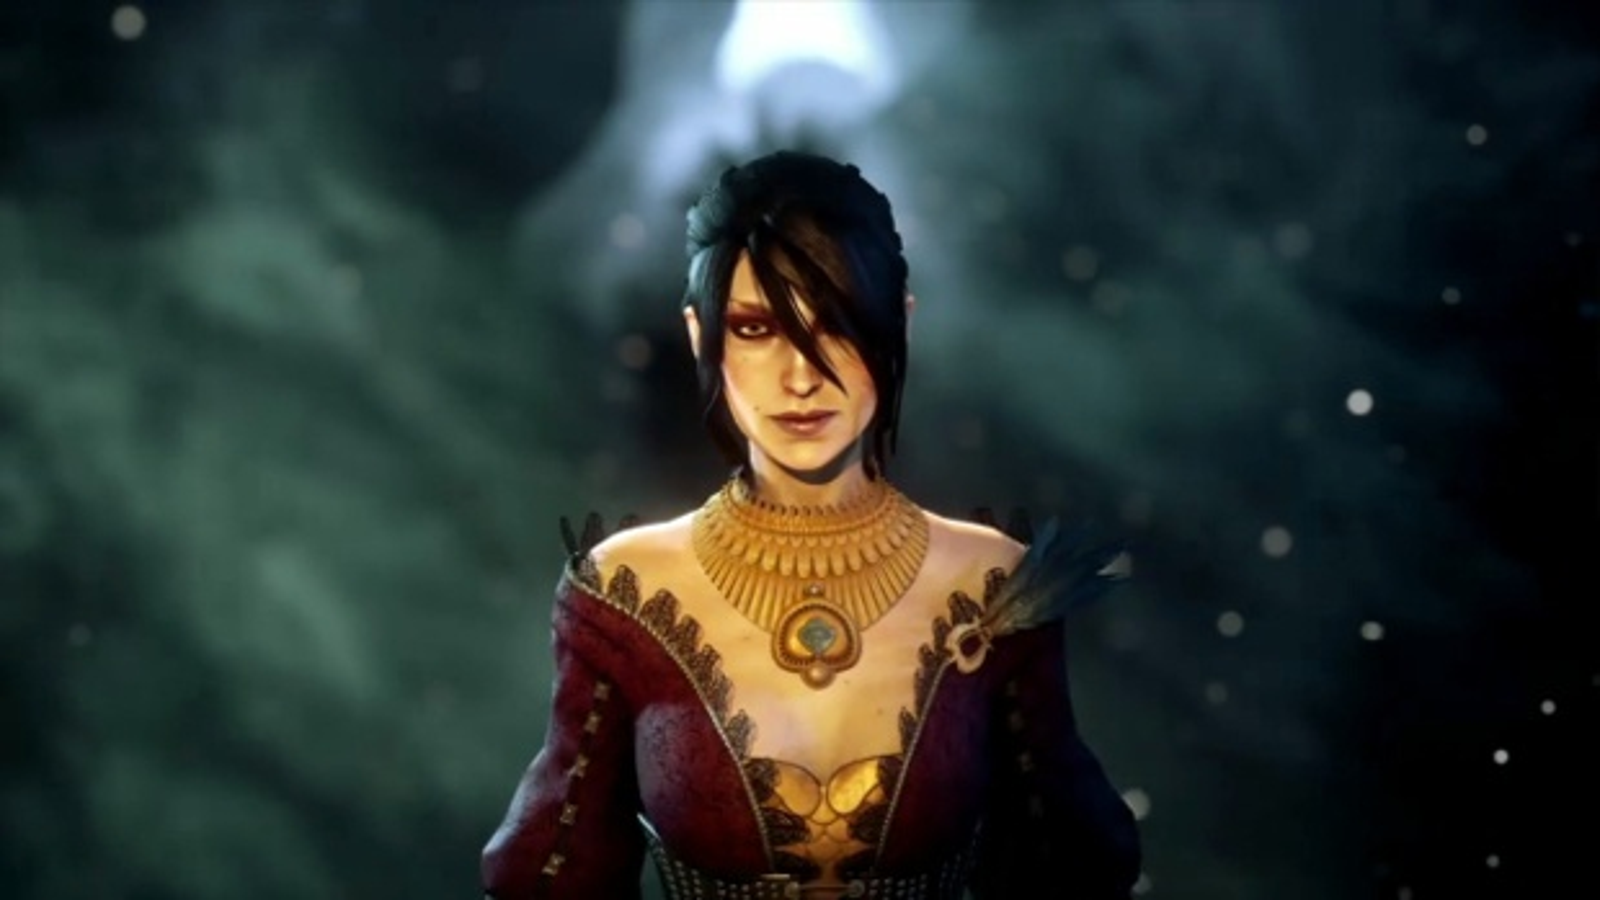 Ranking the Dragon Age Inquisition Romance Options from Worst to Best